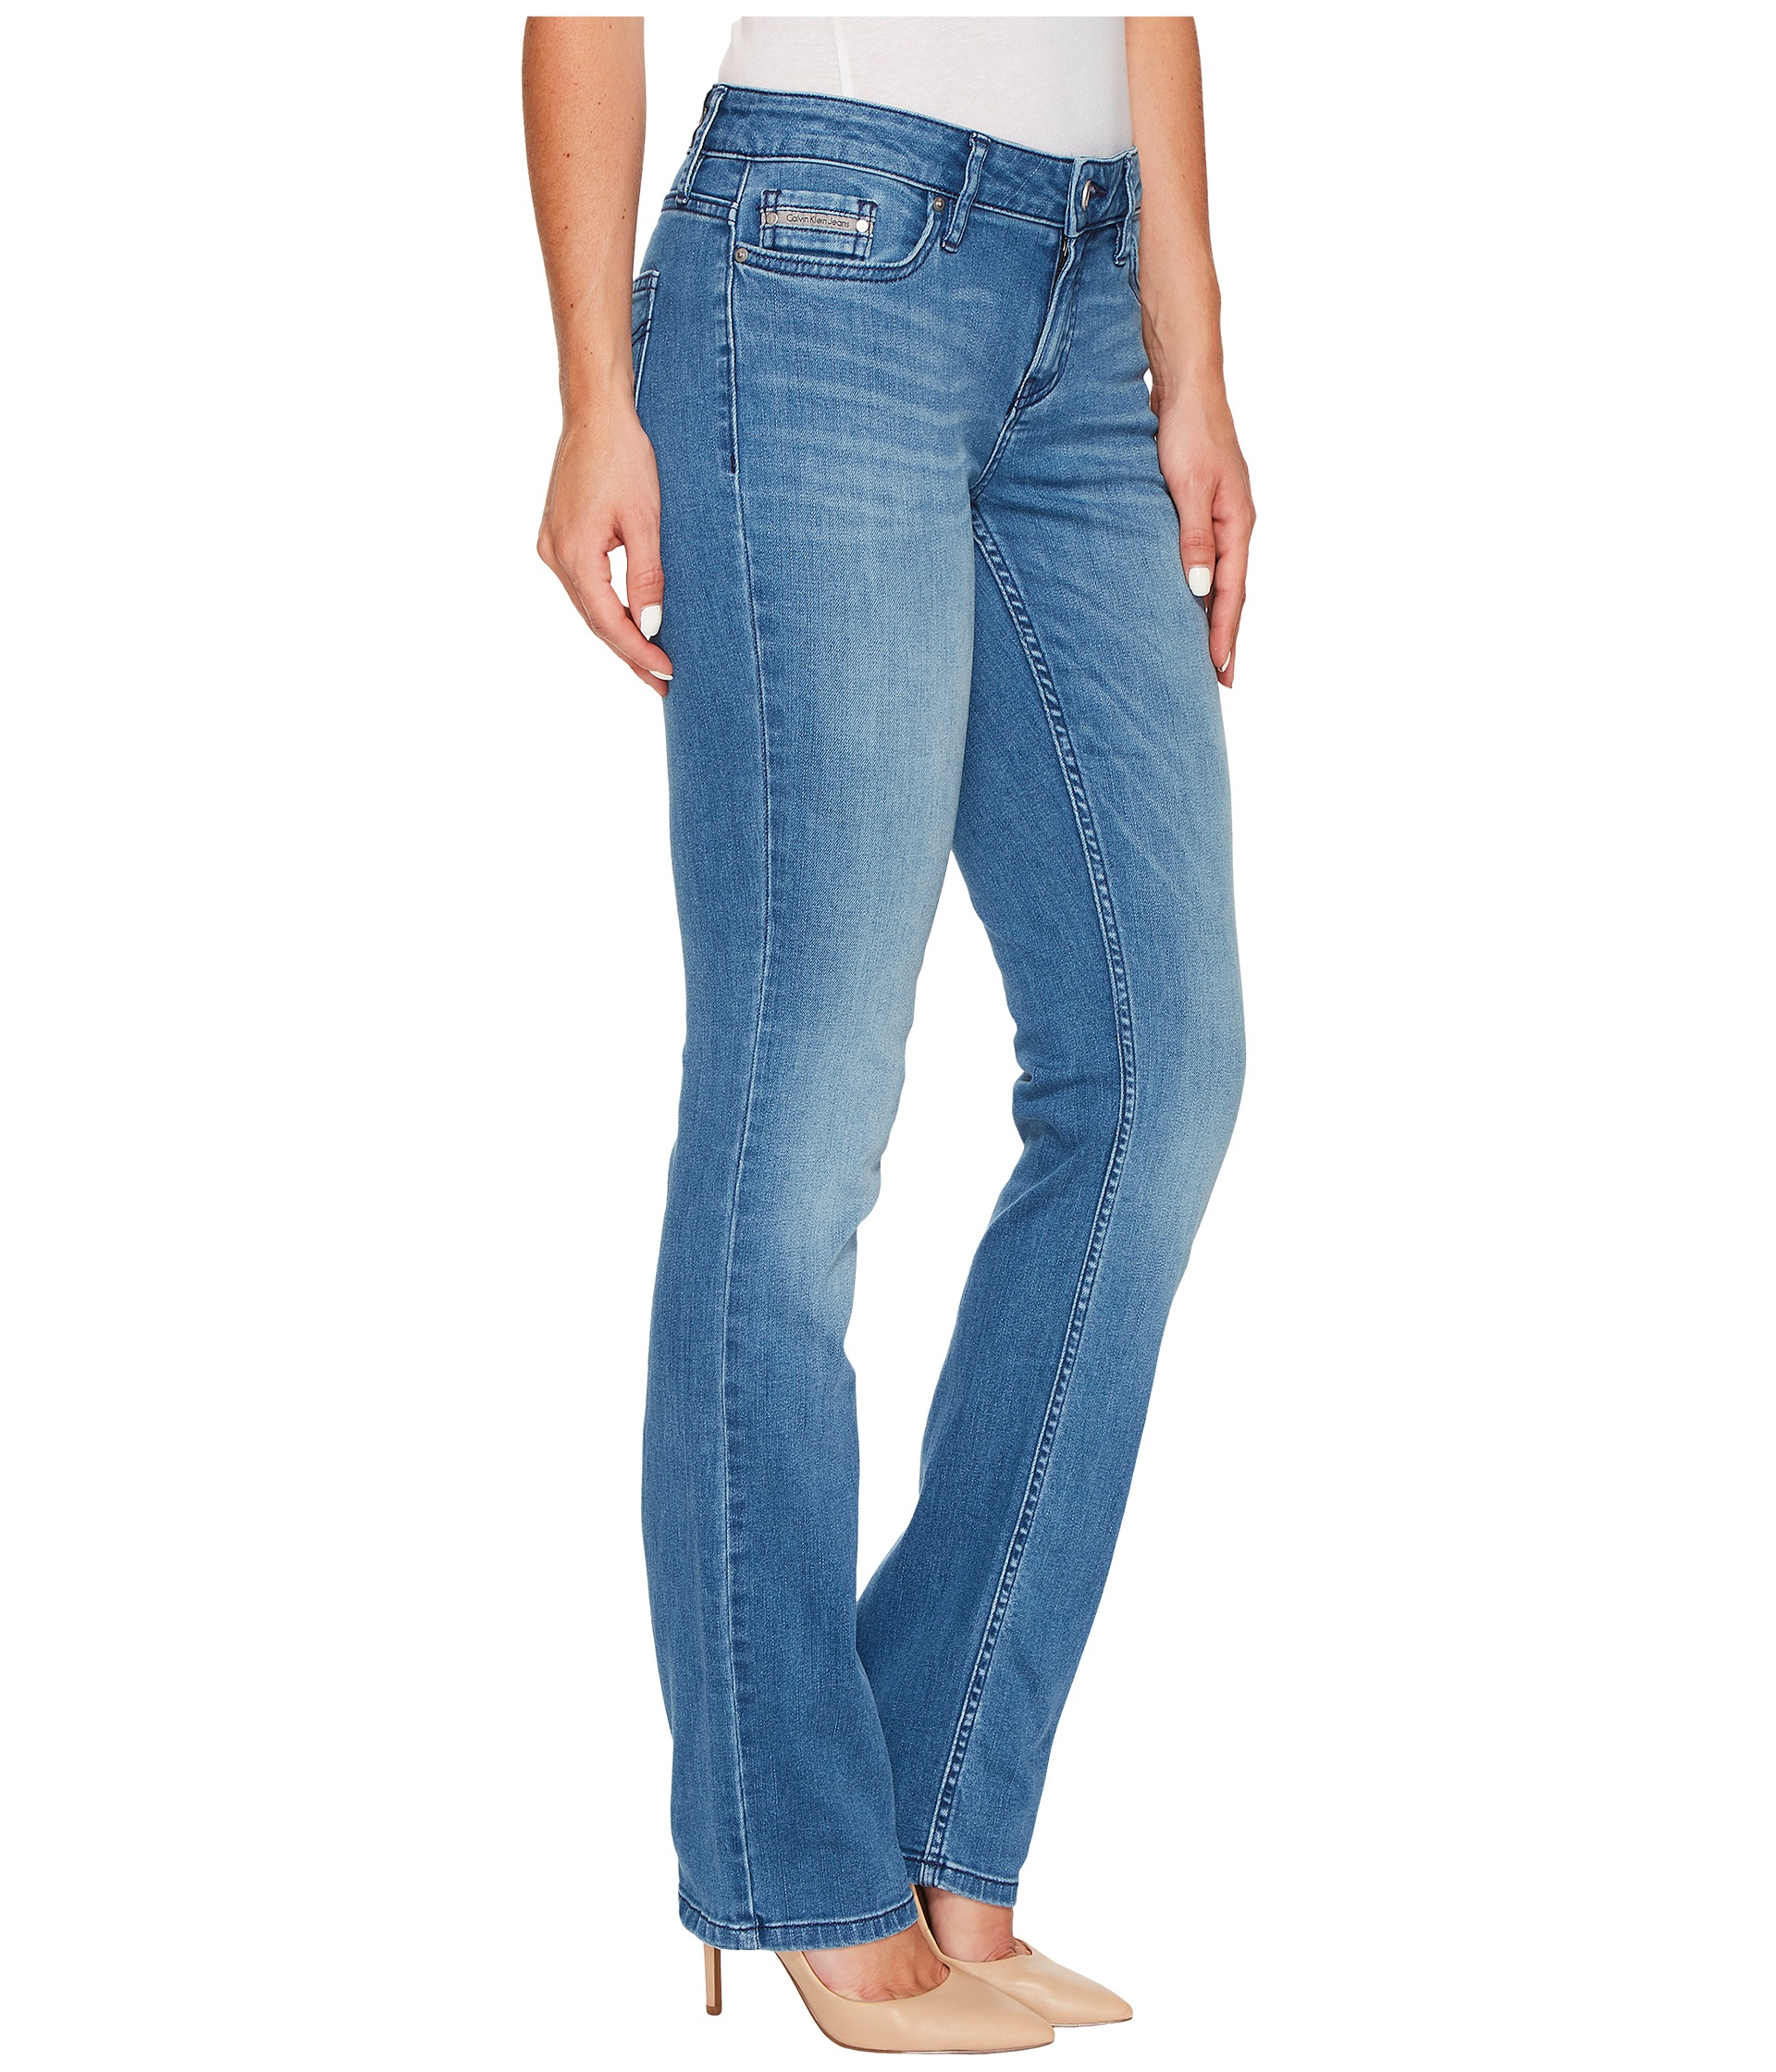 Calvin Klein Jeans Straight Leg Jeans in Sunlit Blue Wash at Zappos.com